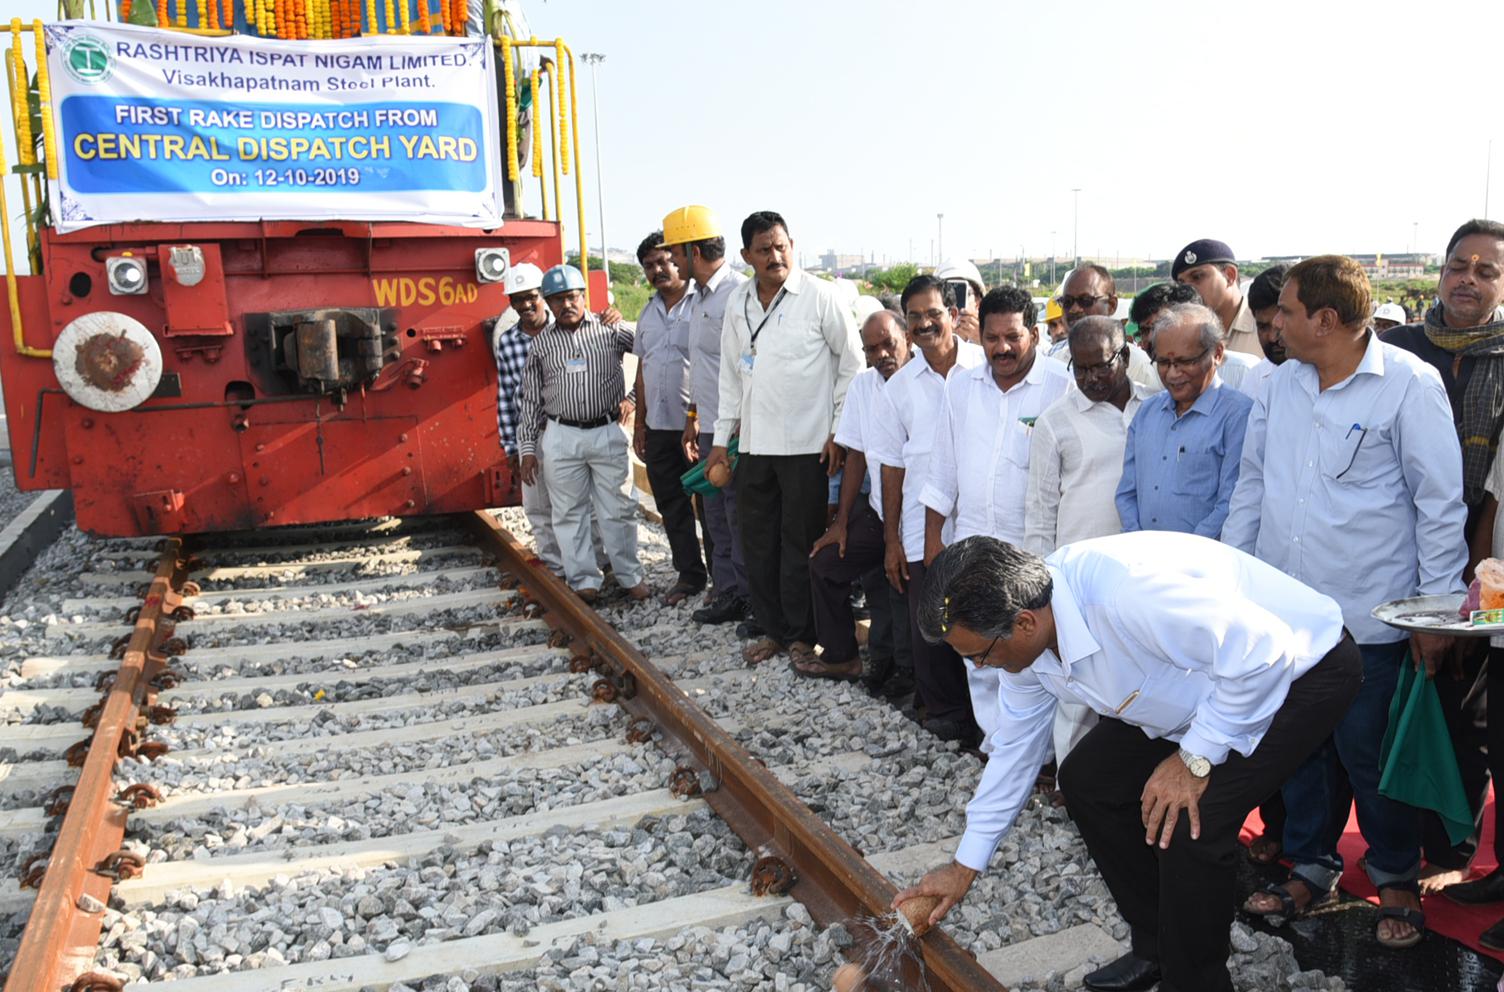 Sri PK Rath, CMD flags off Rail dispatch of VSP products from Central Dispatch Yard